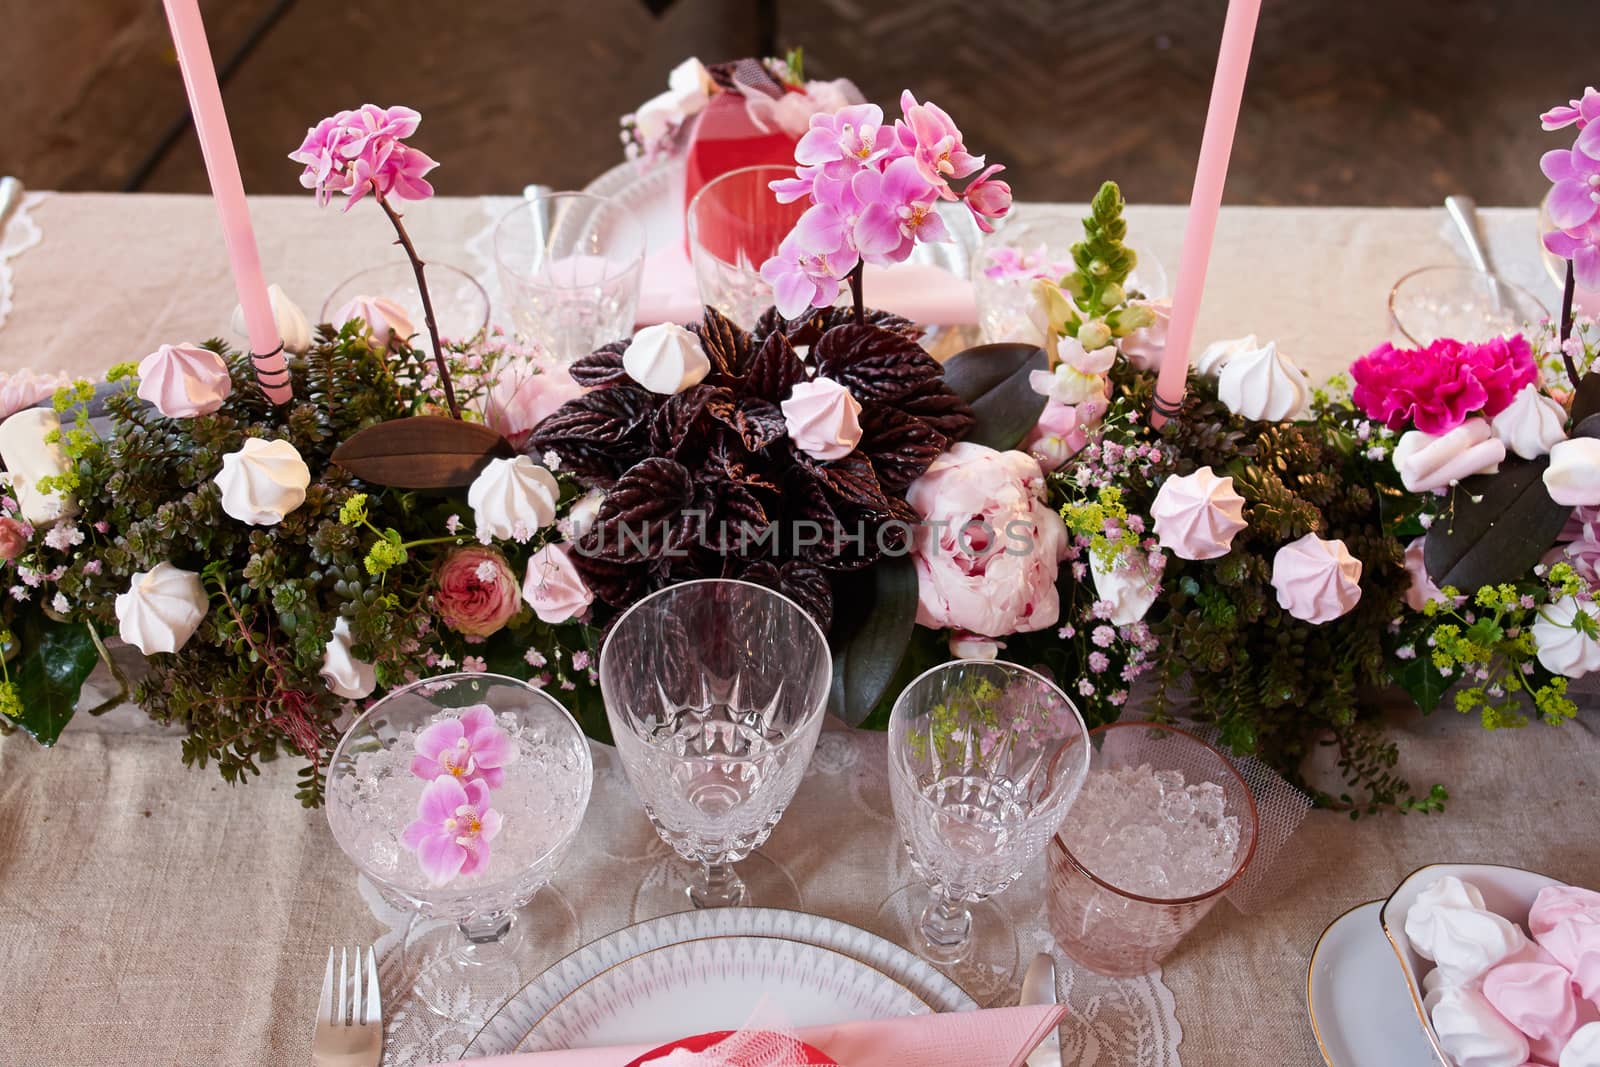 Festive wedding table setting with flowers, napkins, silver cutlery, glasses and candles